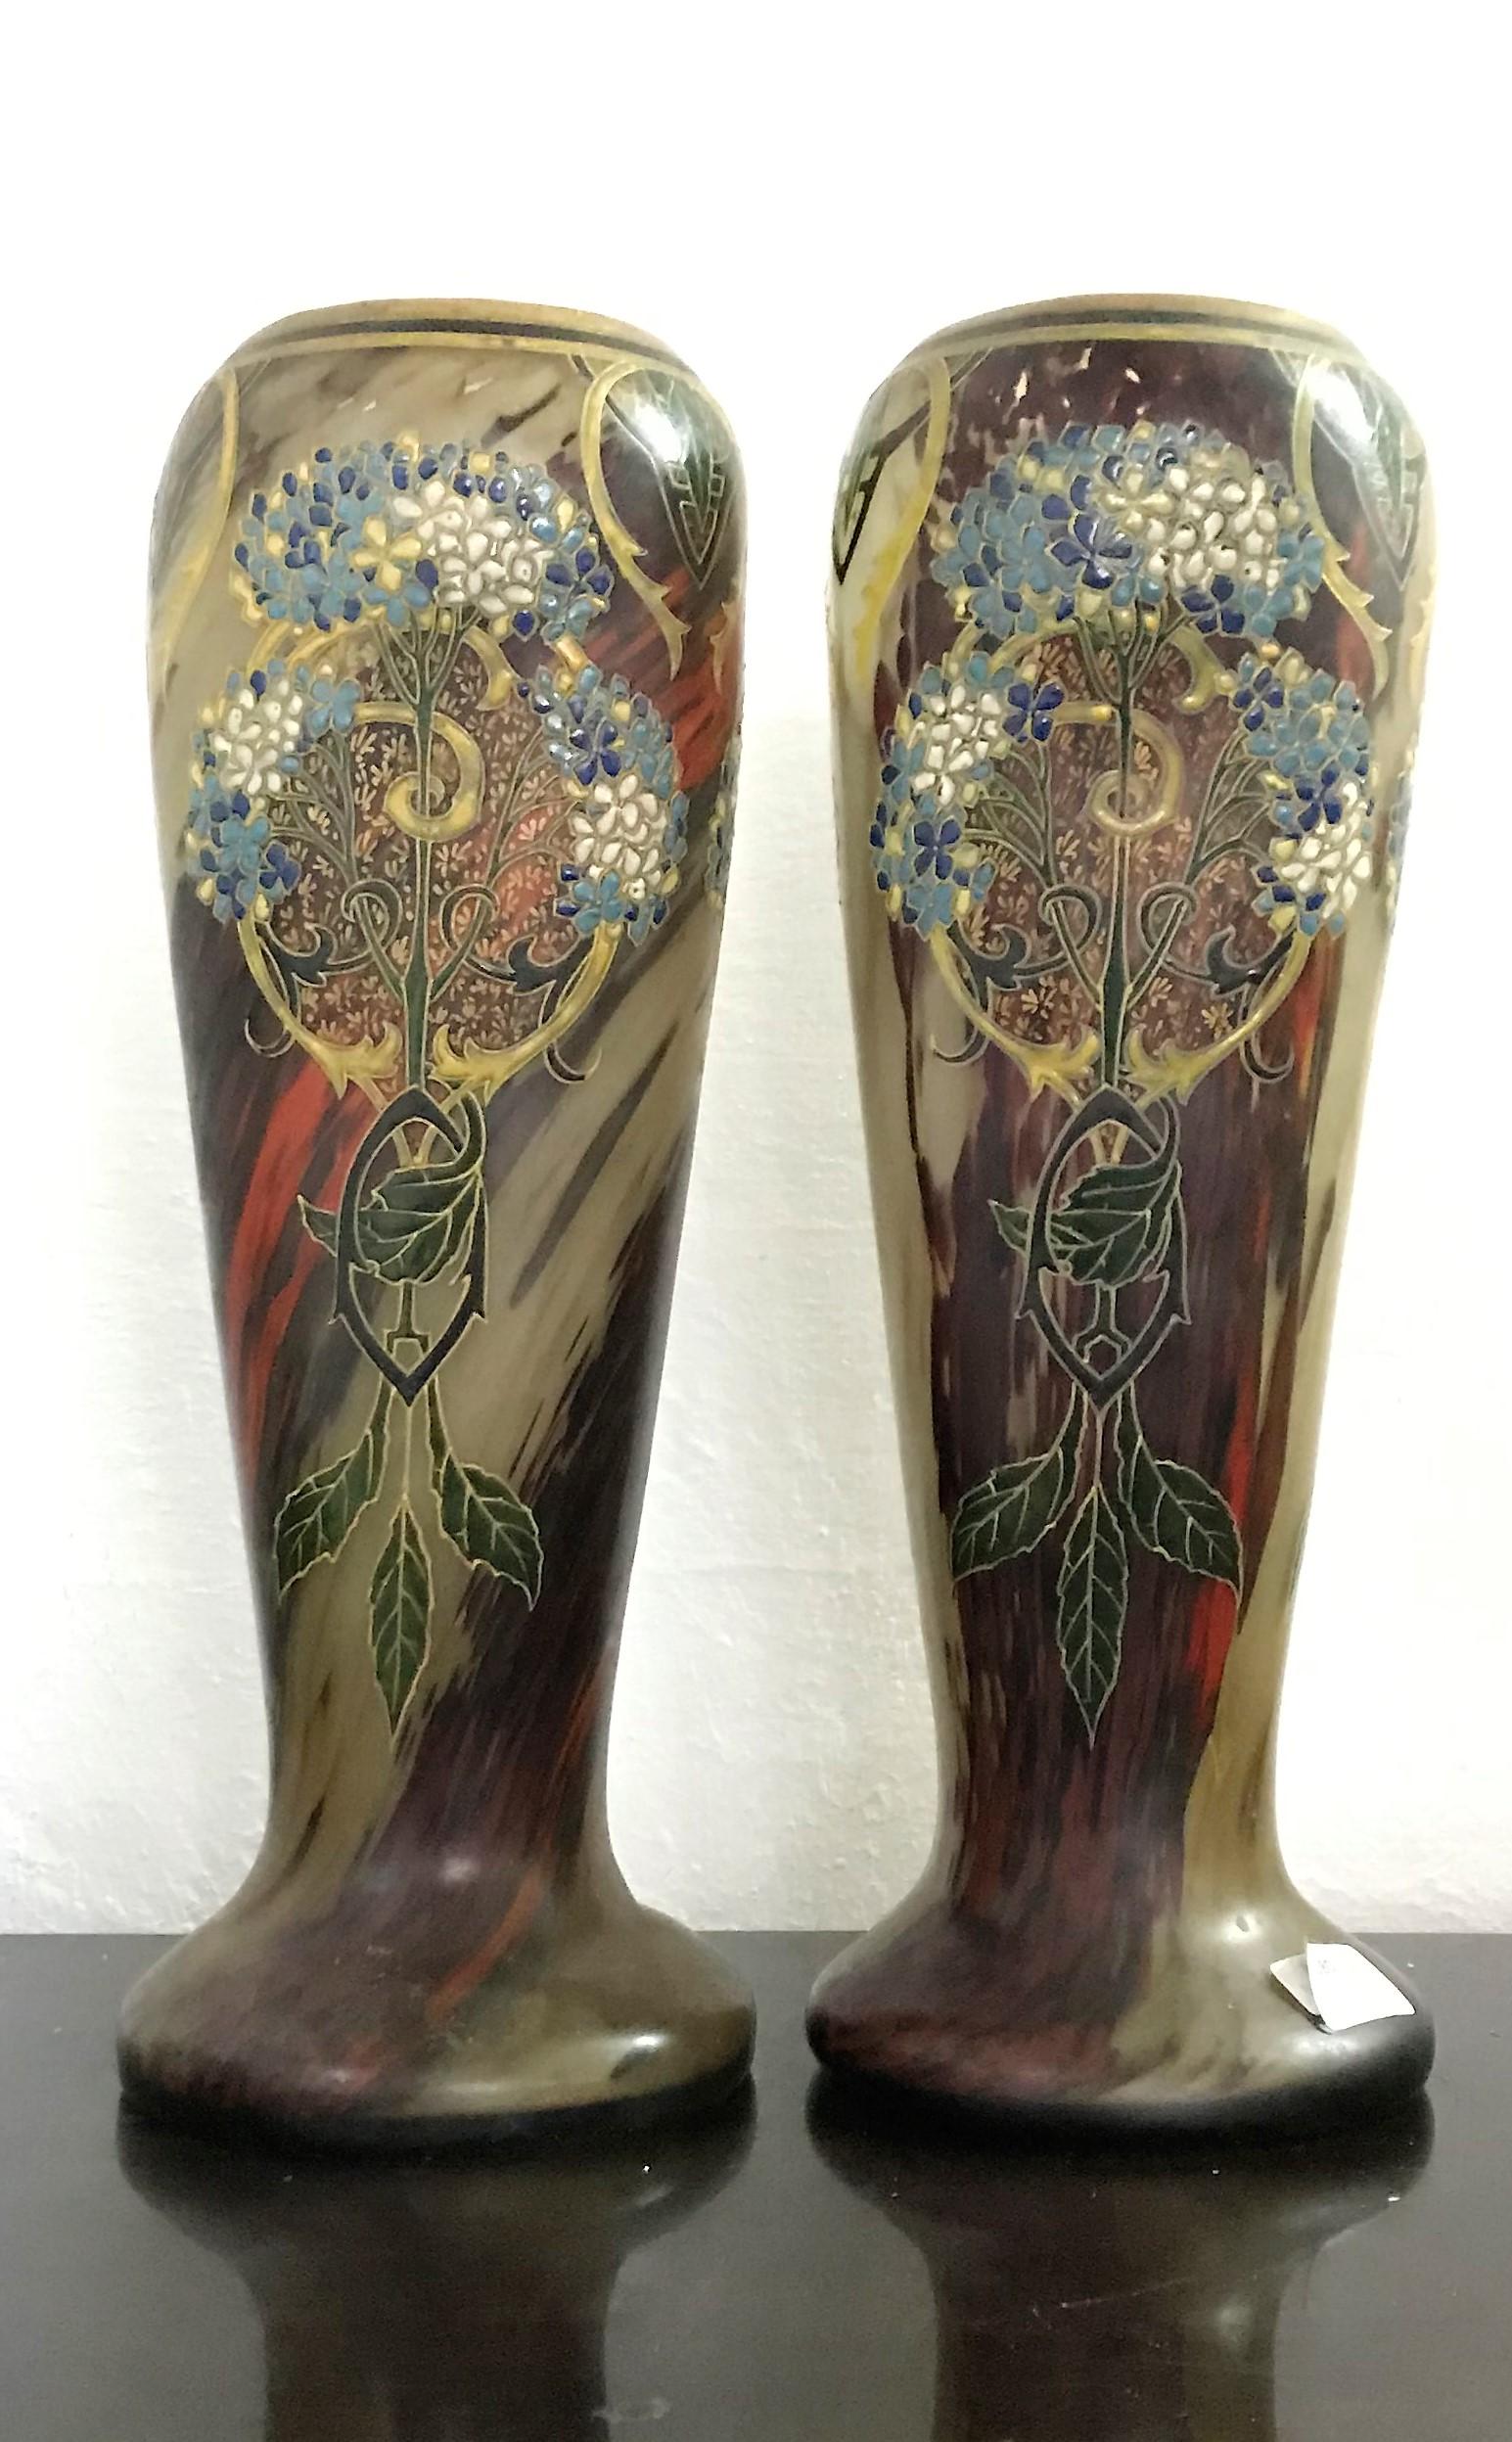 Pair of large Art Nouveau hand blown and hand enameled glass by François Theodore Legras in France, circa. 1890.
Decorated in a clear Art Nouveau style, both vases present three sides with Trellises, flowers and stylised scroll work.
Both Vases